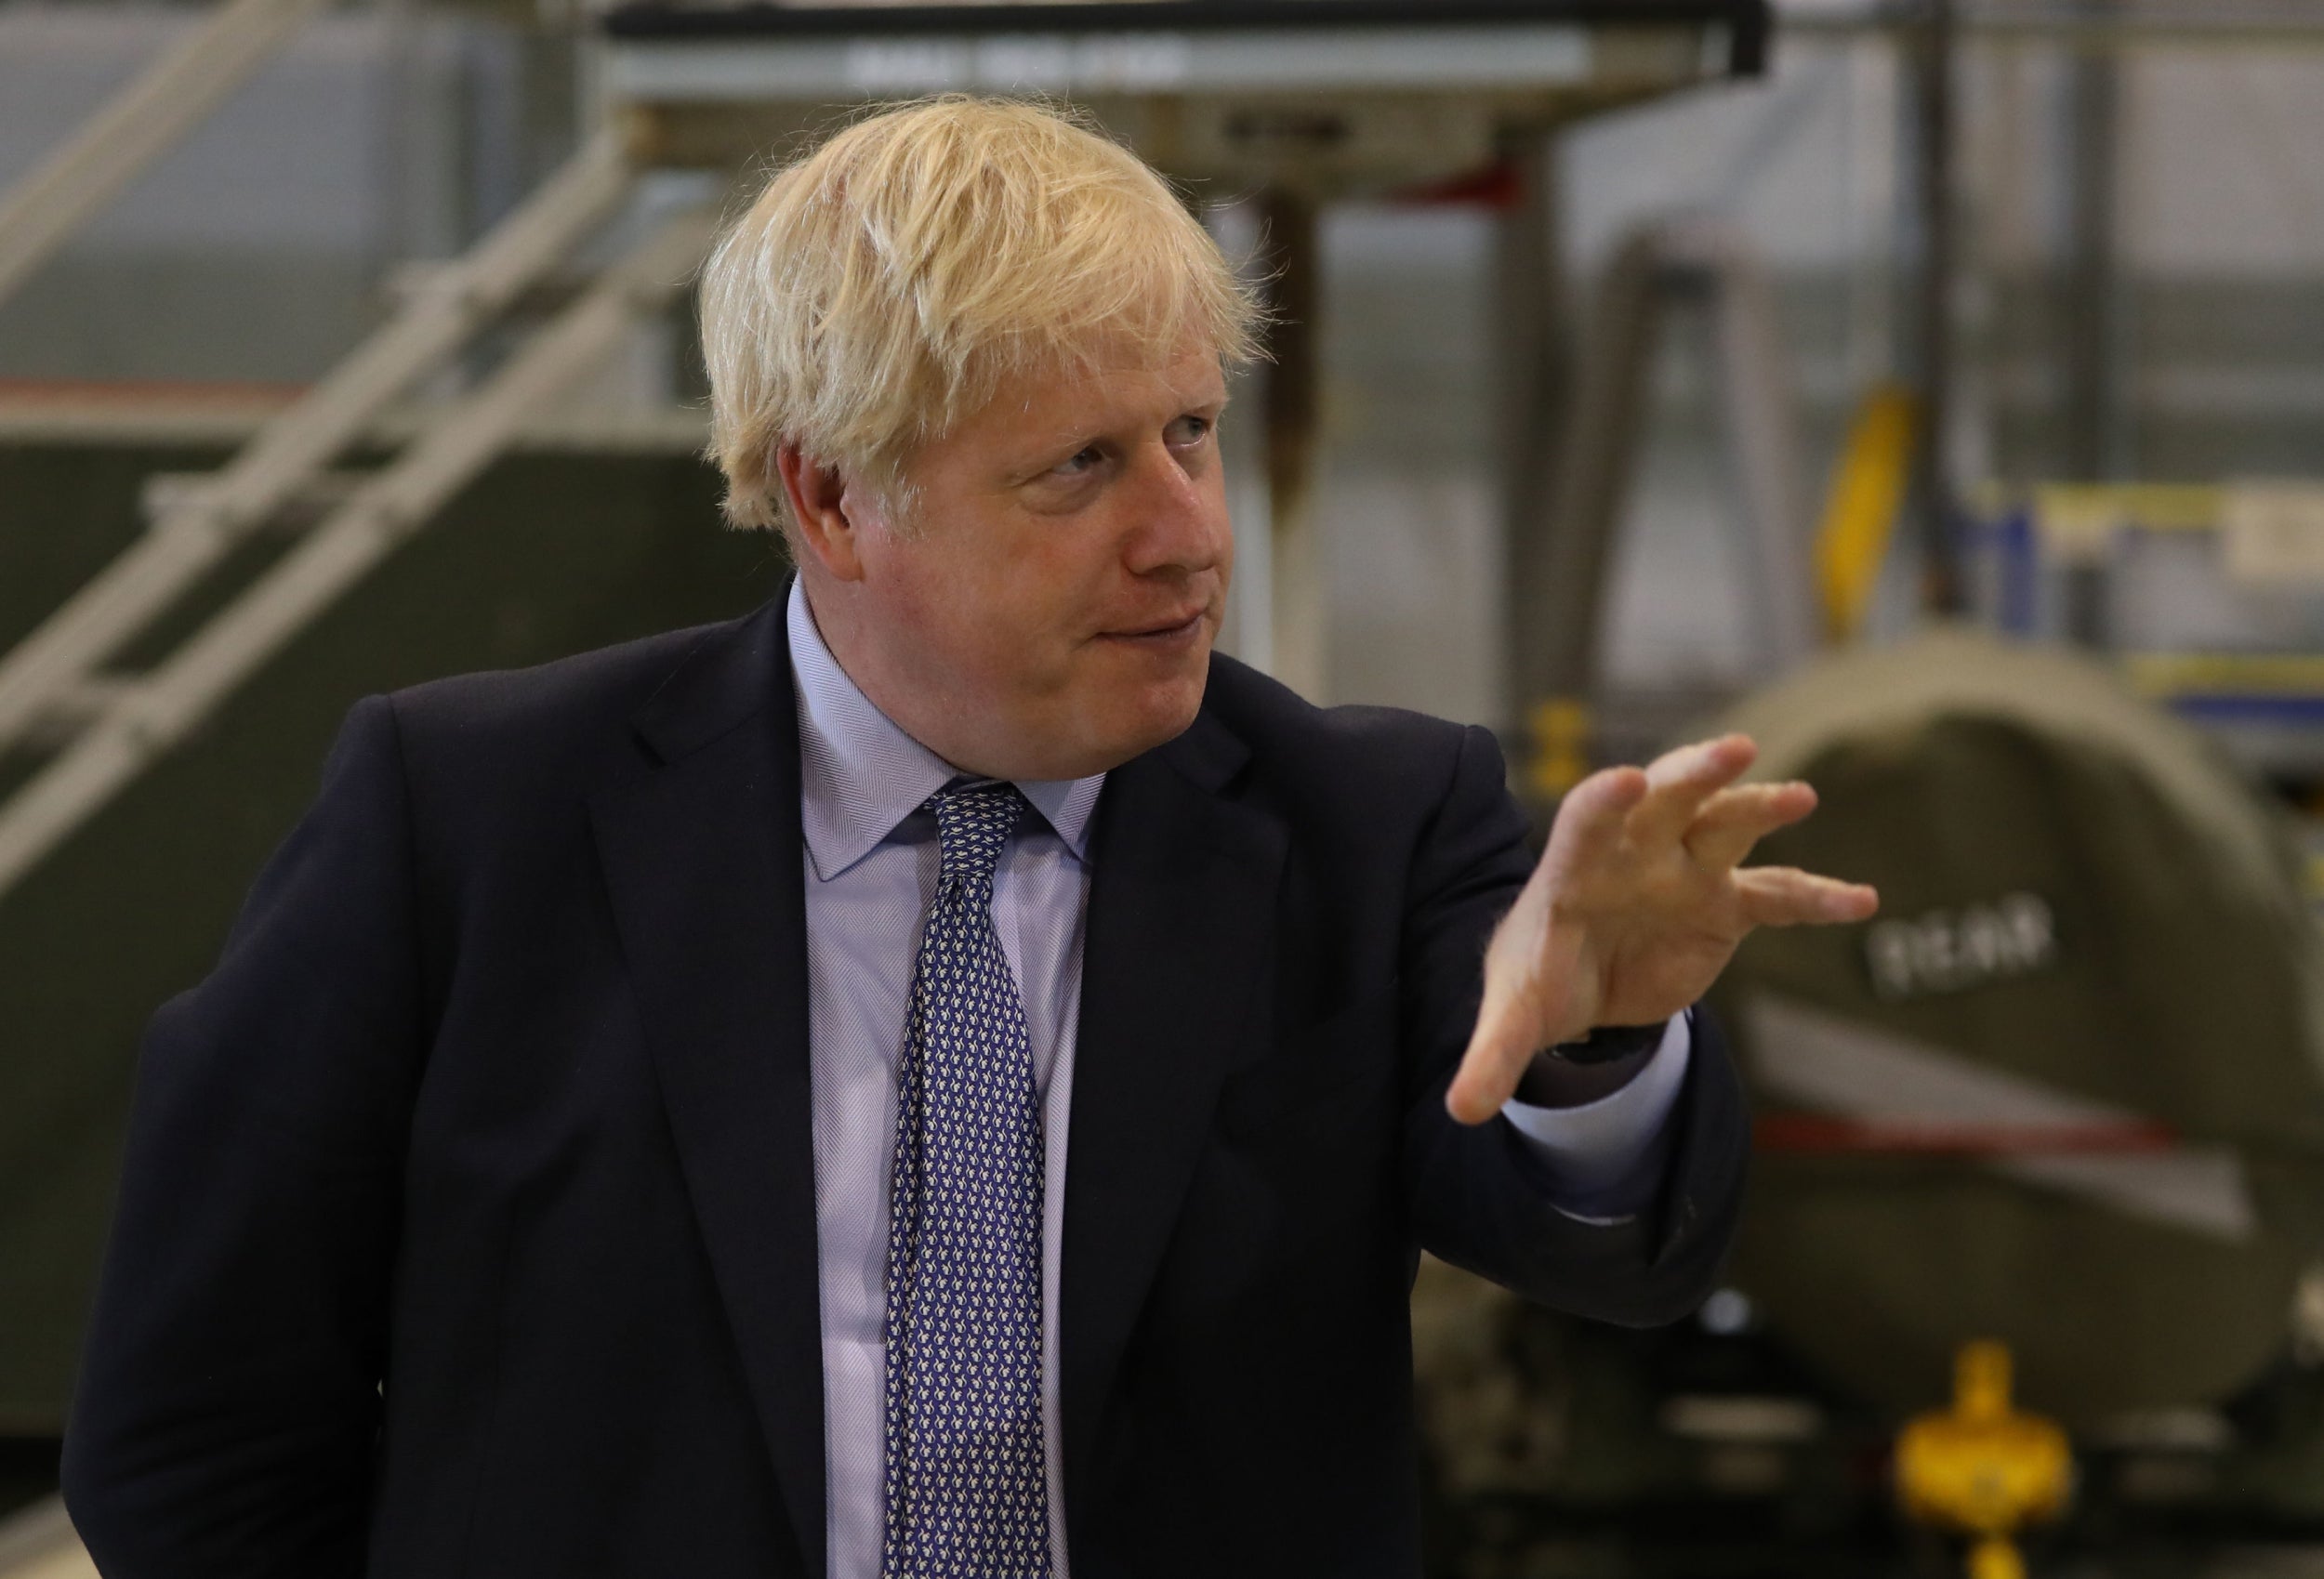 The PM has said he wants to look at whether the system ‘goes too far’